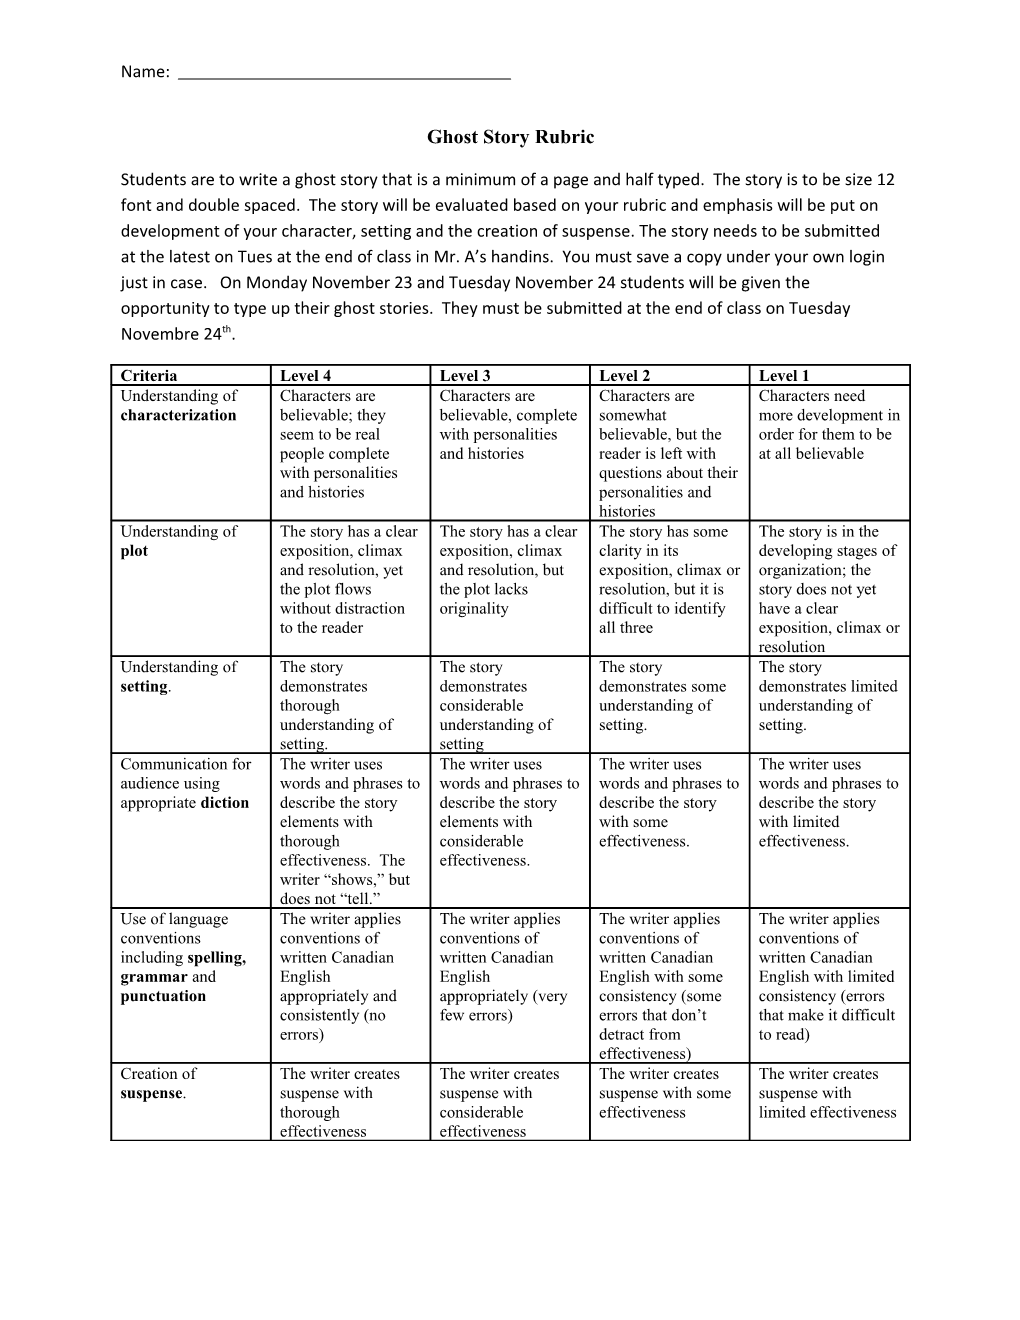 Ghost Story Rubric